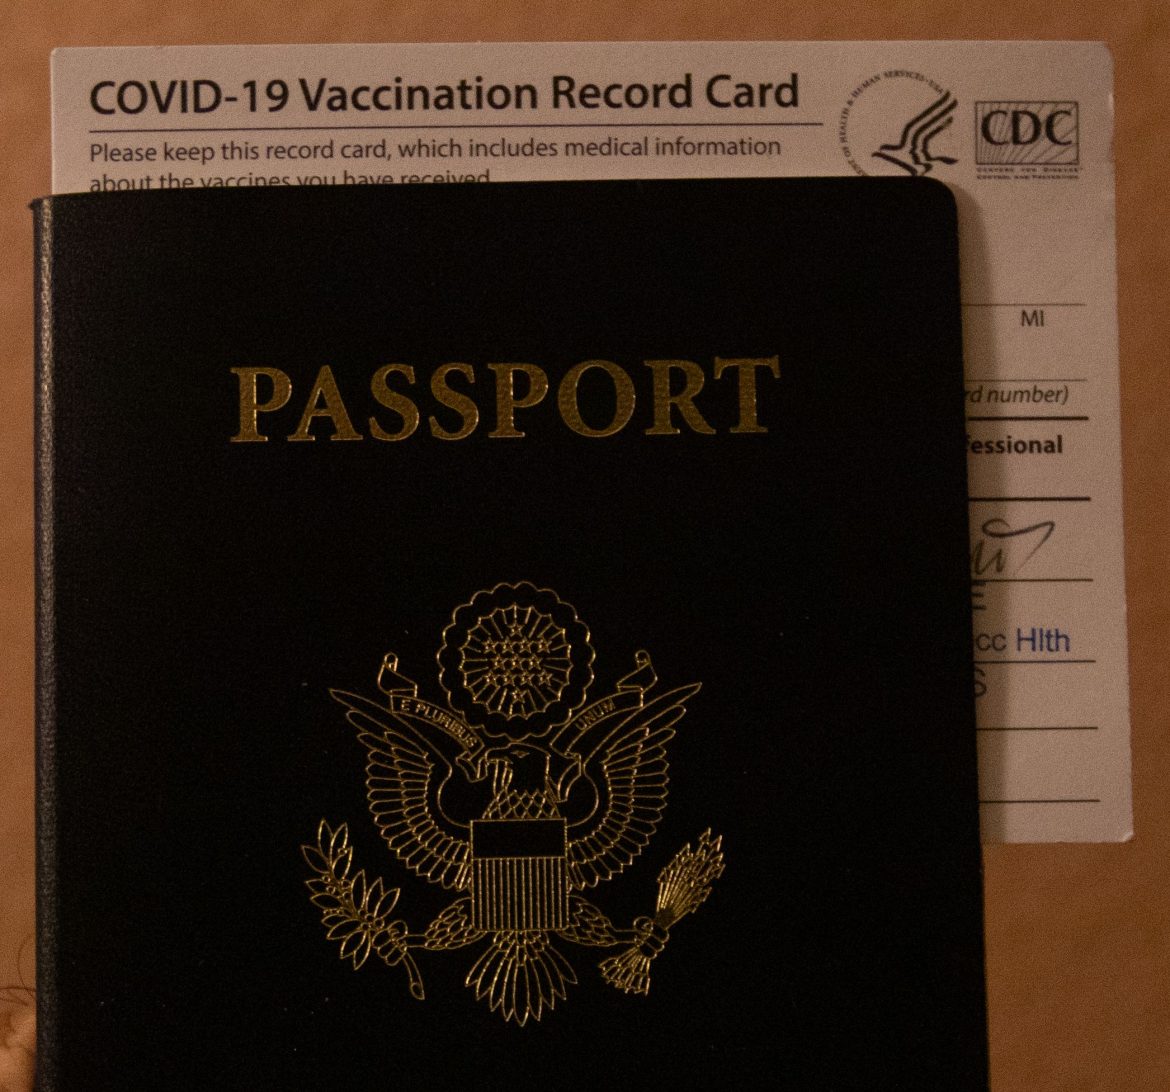 Opposition to vaccine passports gains traction